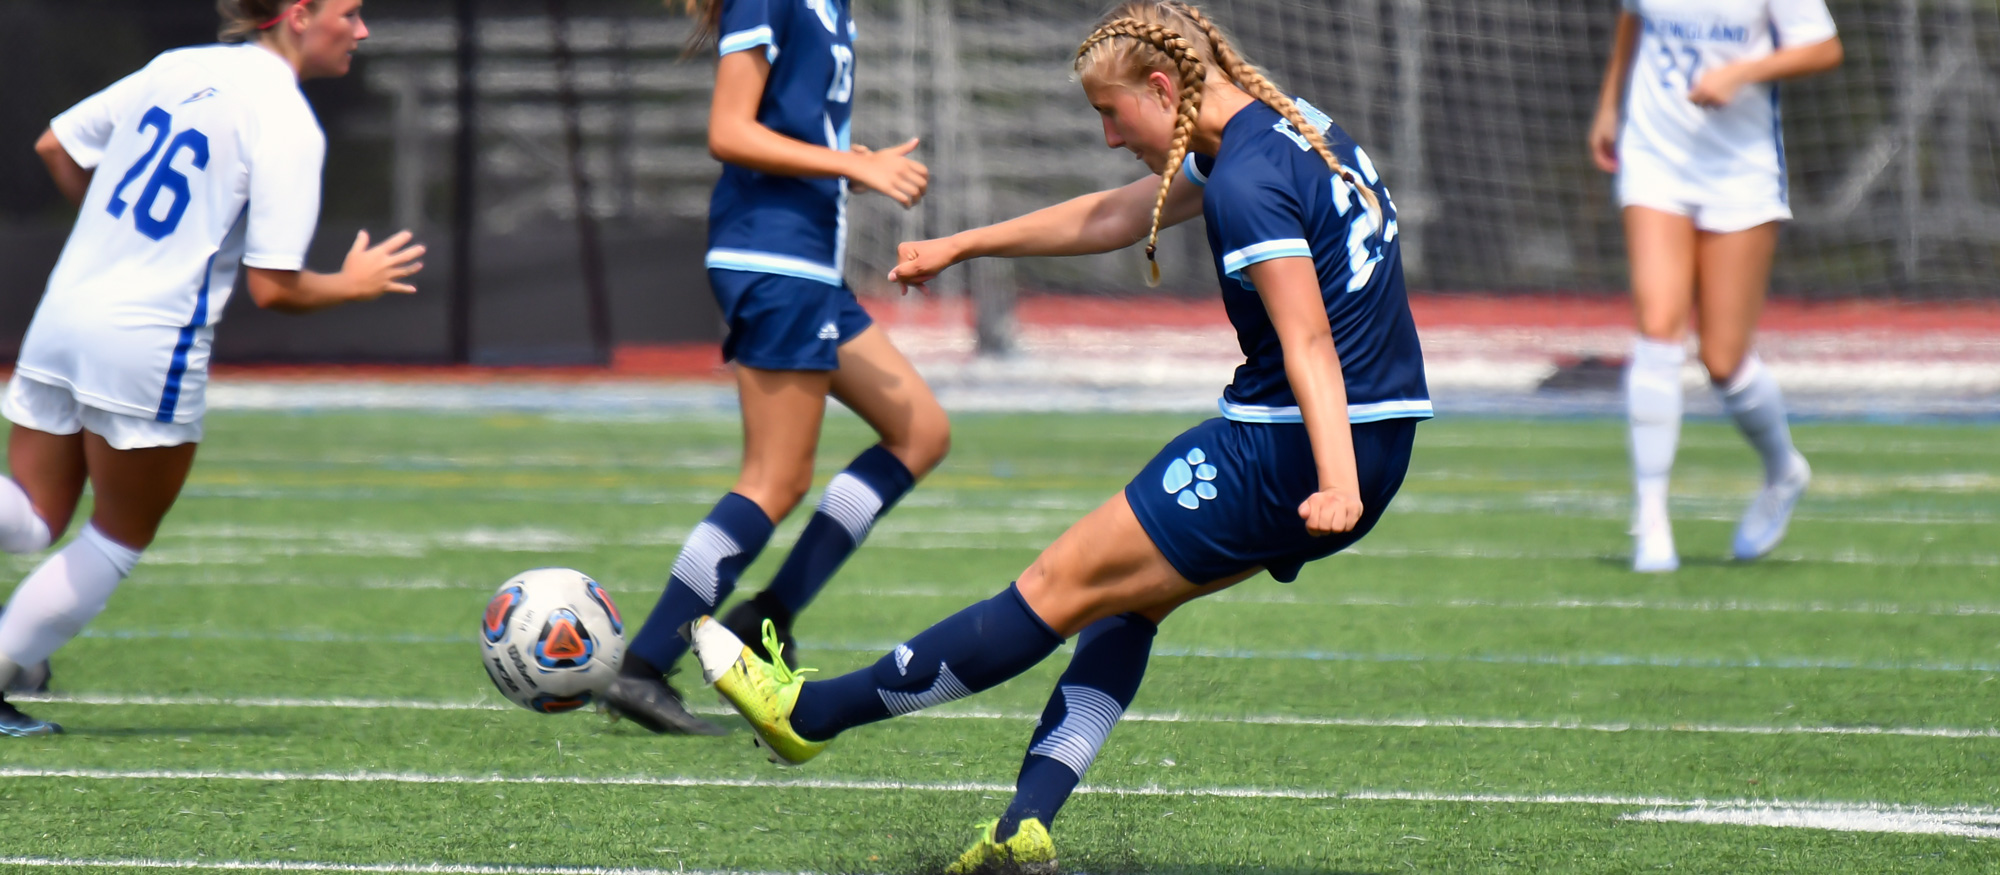 Ada Siepmann's physical defense helped Mount Holyoke keep No. 18 MIT close for much of the Lyons' 5-0 loss on Sept. 24, 2022. (RJB Sports file photo)